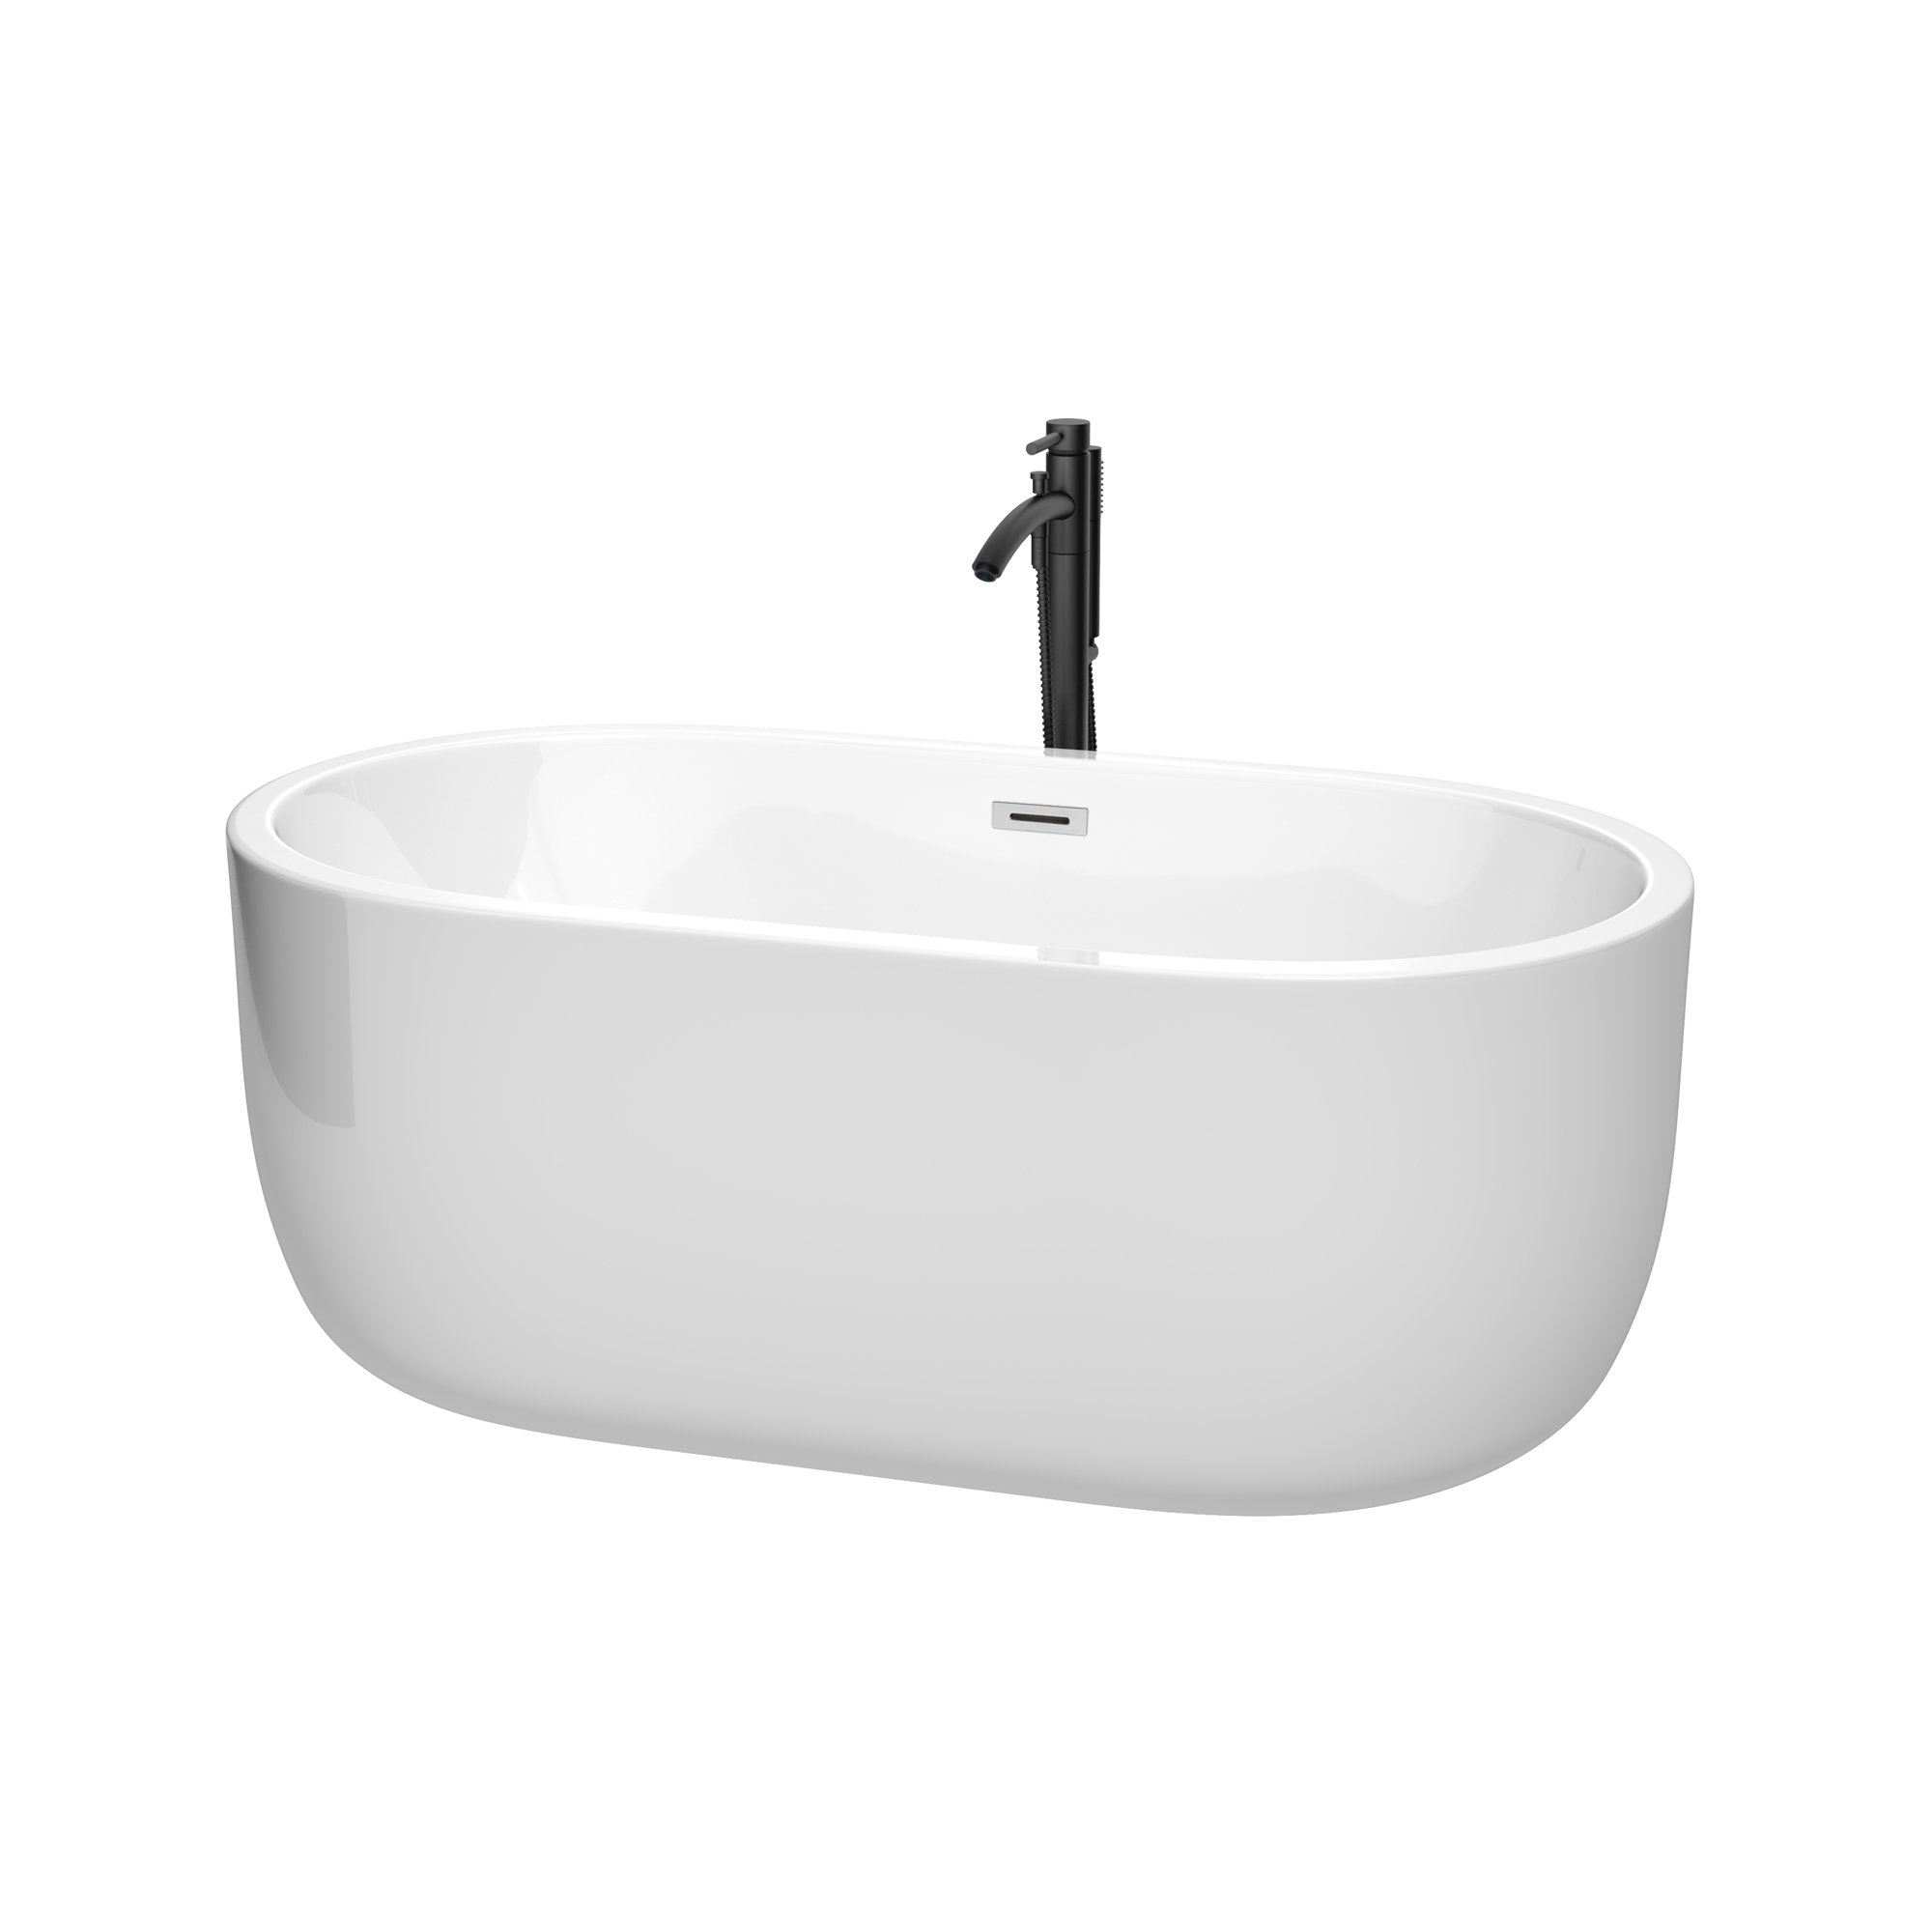 60" Freestanding Bathtub in White with Floor Mounted Faucet in Matte Black and Polished Chrome Trim